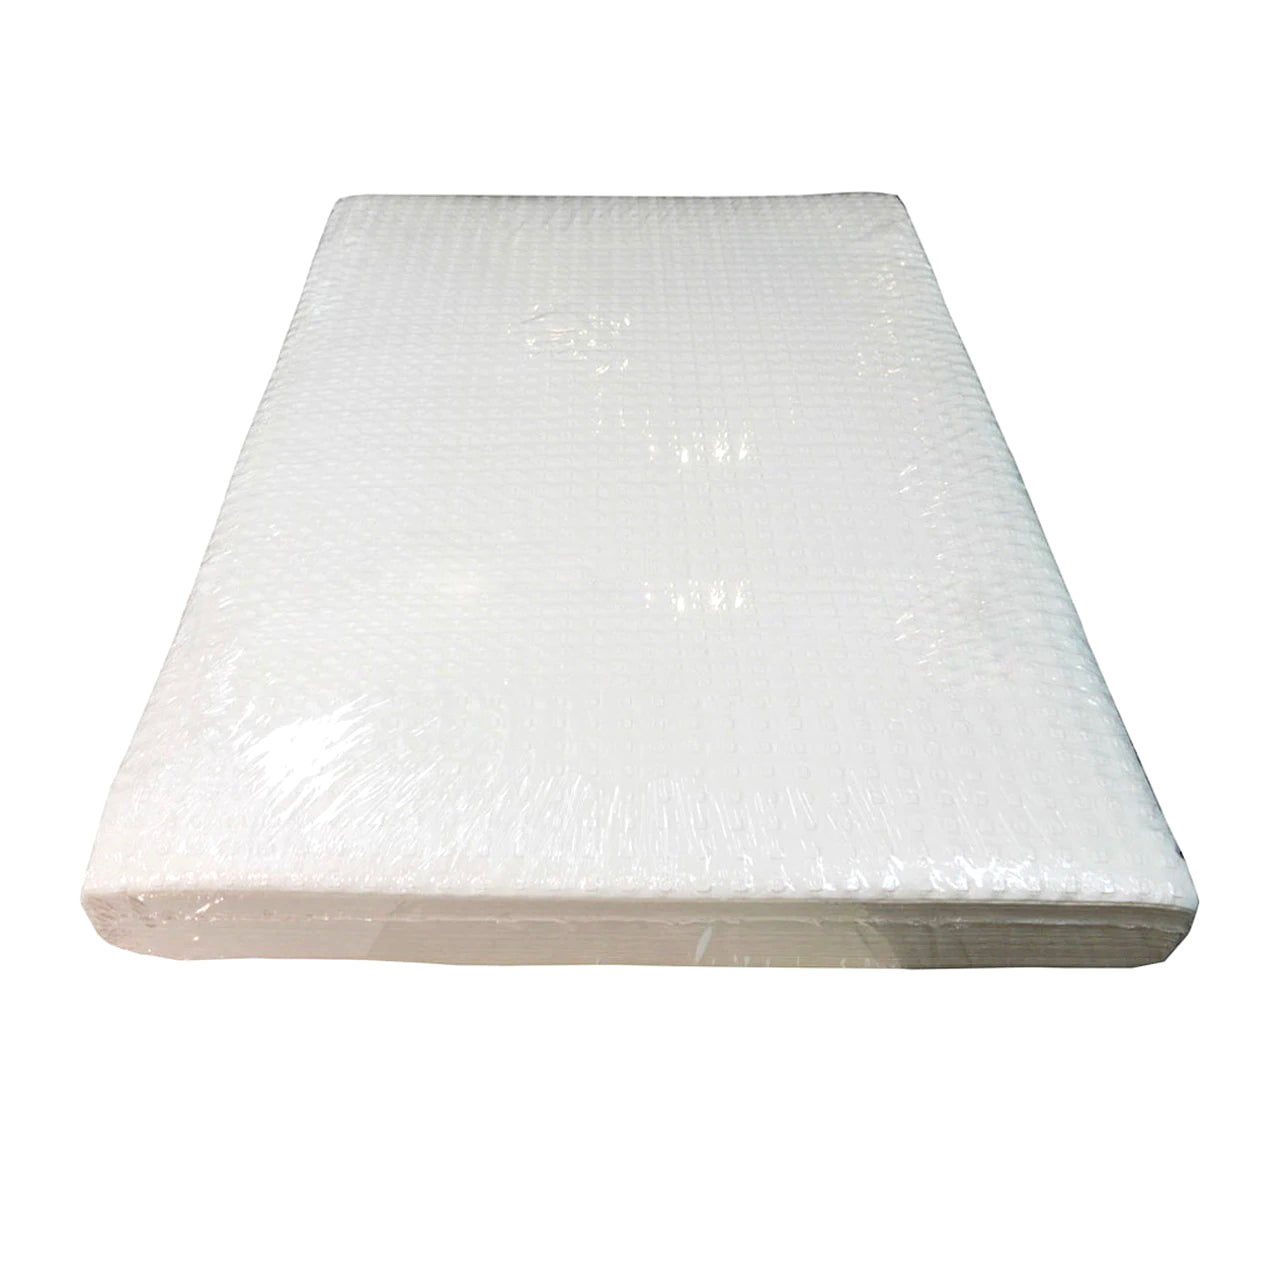 Cello Clinical Barrier Pad 315mm x 500mm 100 Pieces